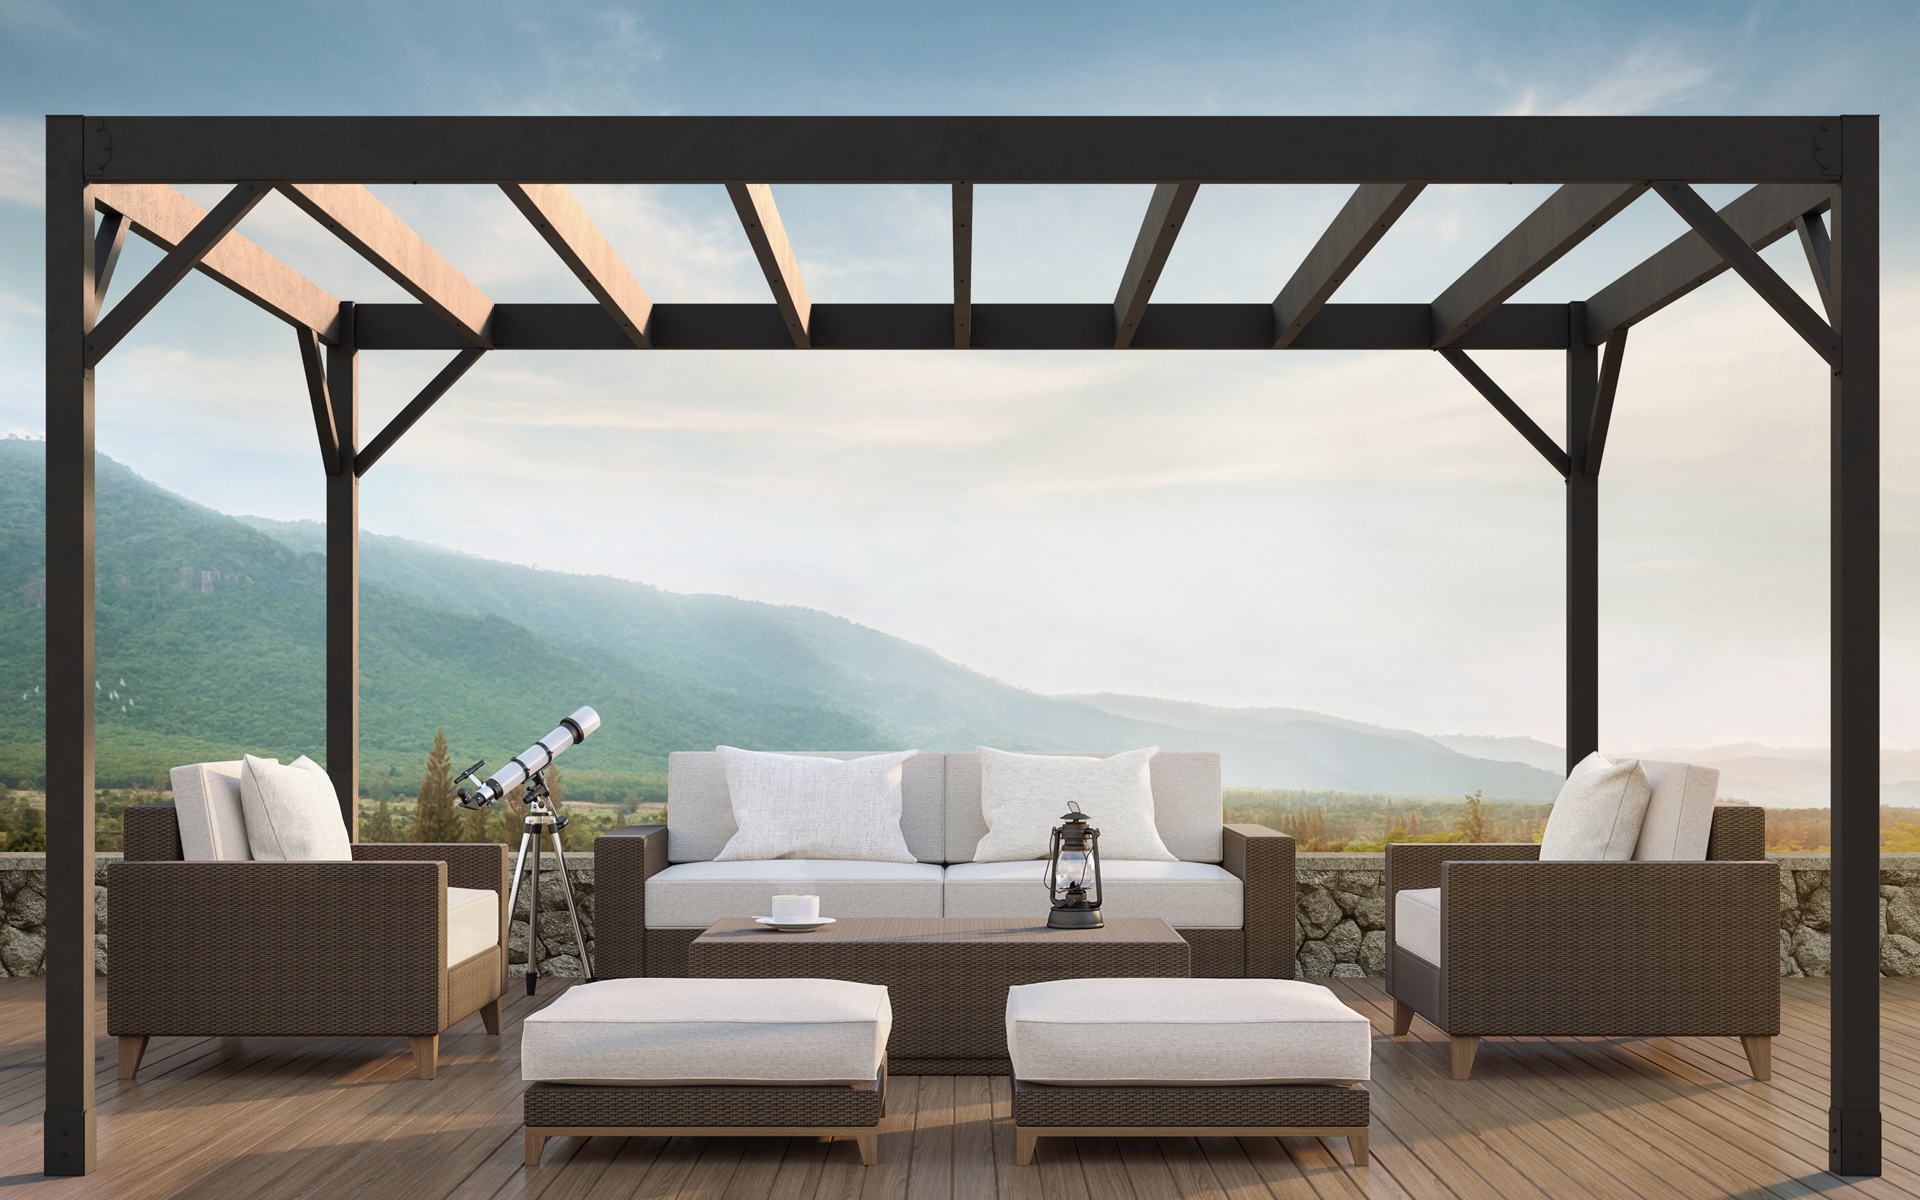 Steel pergola over an outdoor living space with scenic views of mountains in the background.